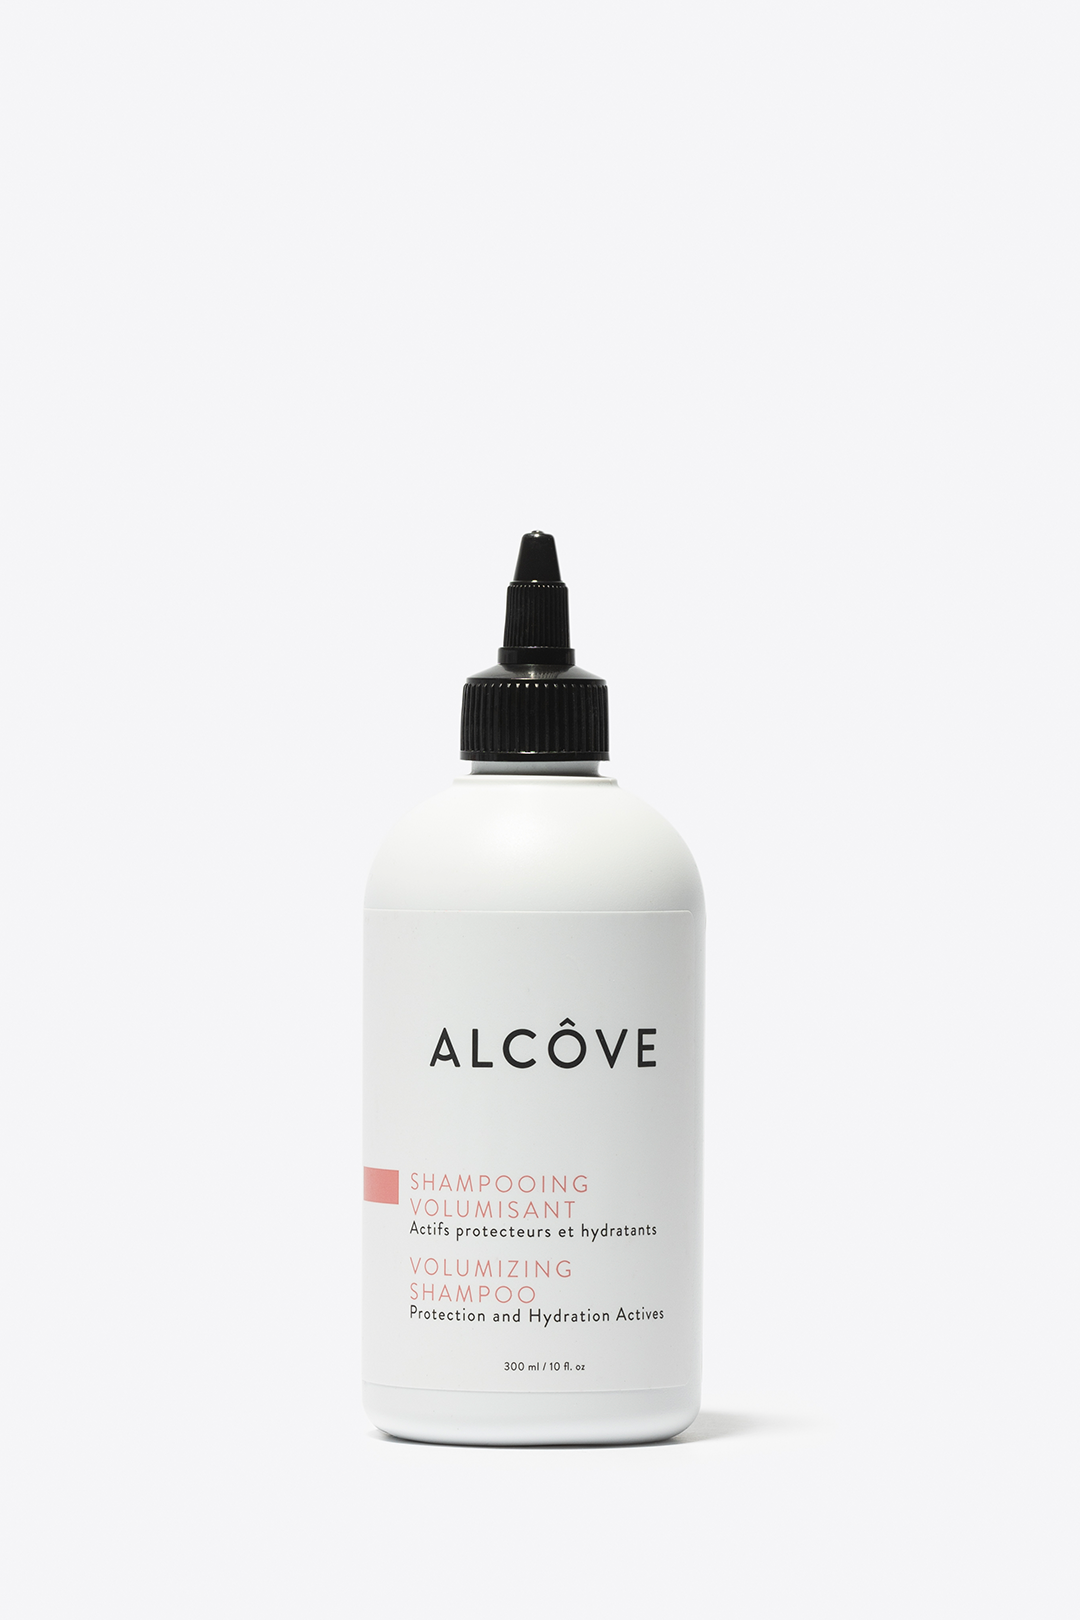 Alcove - VOLUMIZING SHAMPOO - by Alcove |ProCare Outlet|